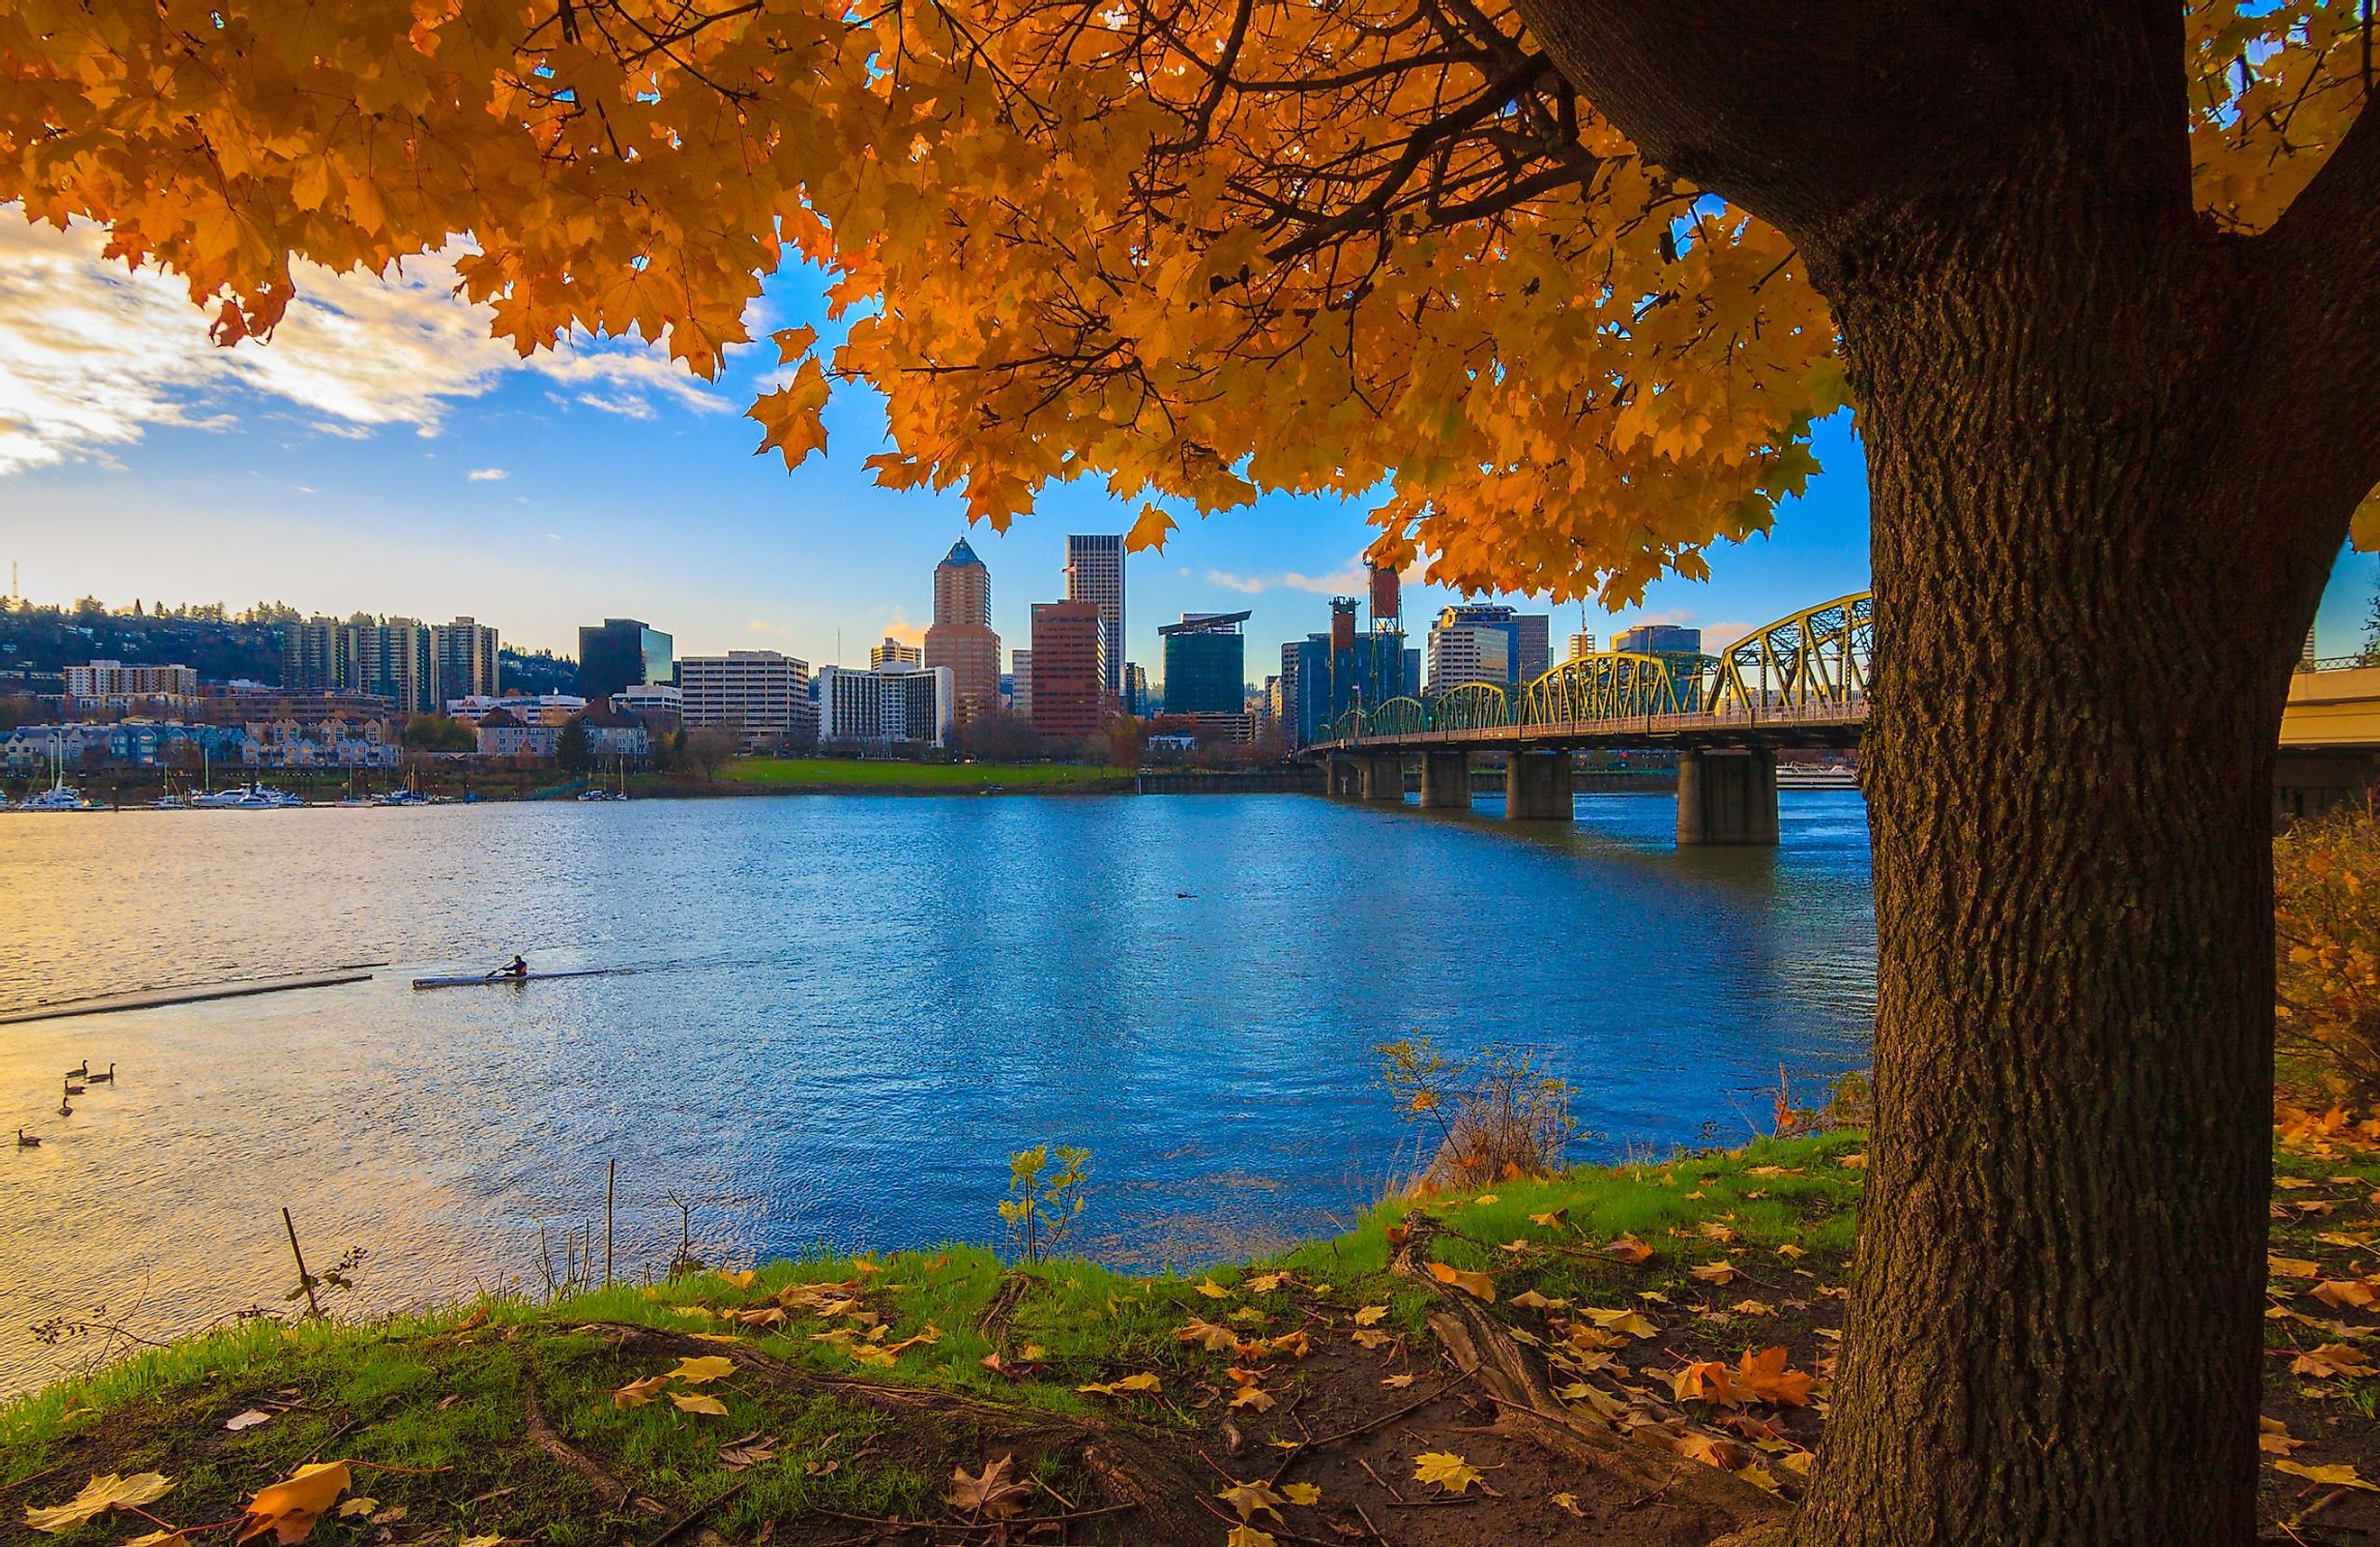 View of Portland, Oregon overlooking the Willamette River on a fall afternoon.